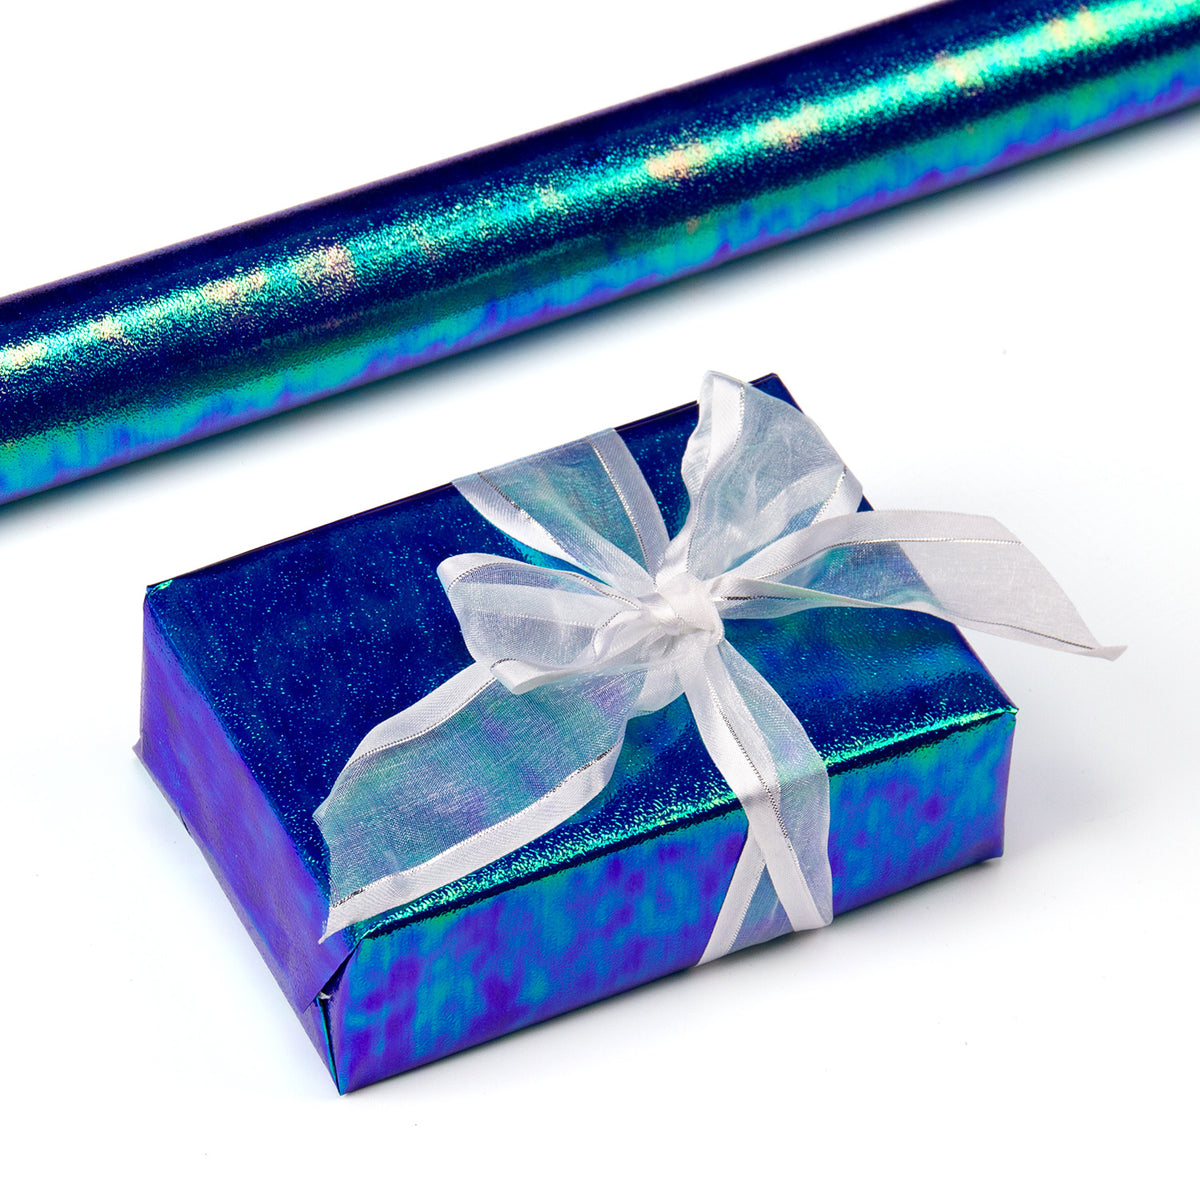 RUSPEPA Gift Wrapping Tissue Paper - Navy Blue Tissue Paper for